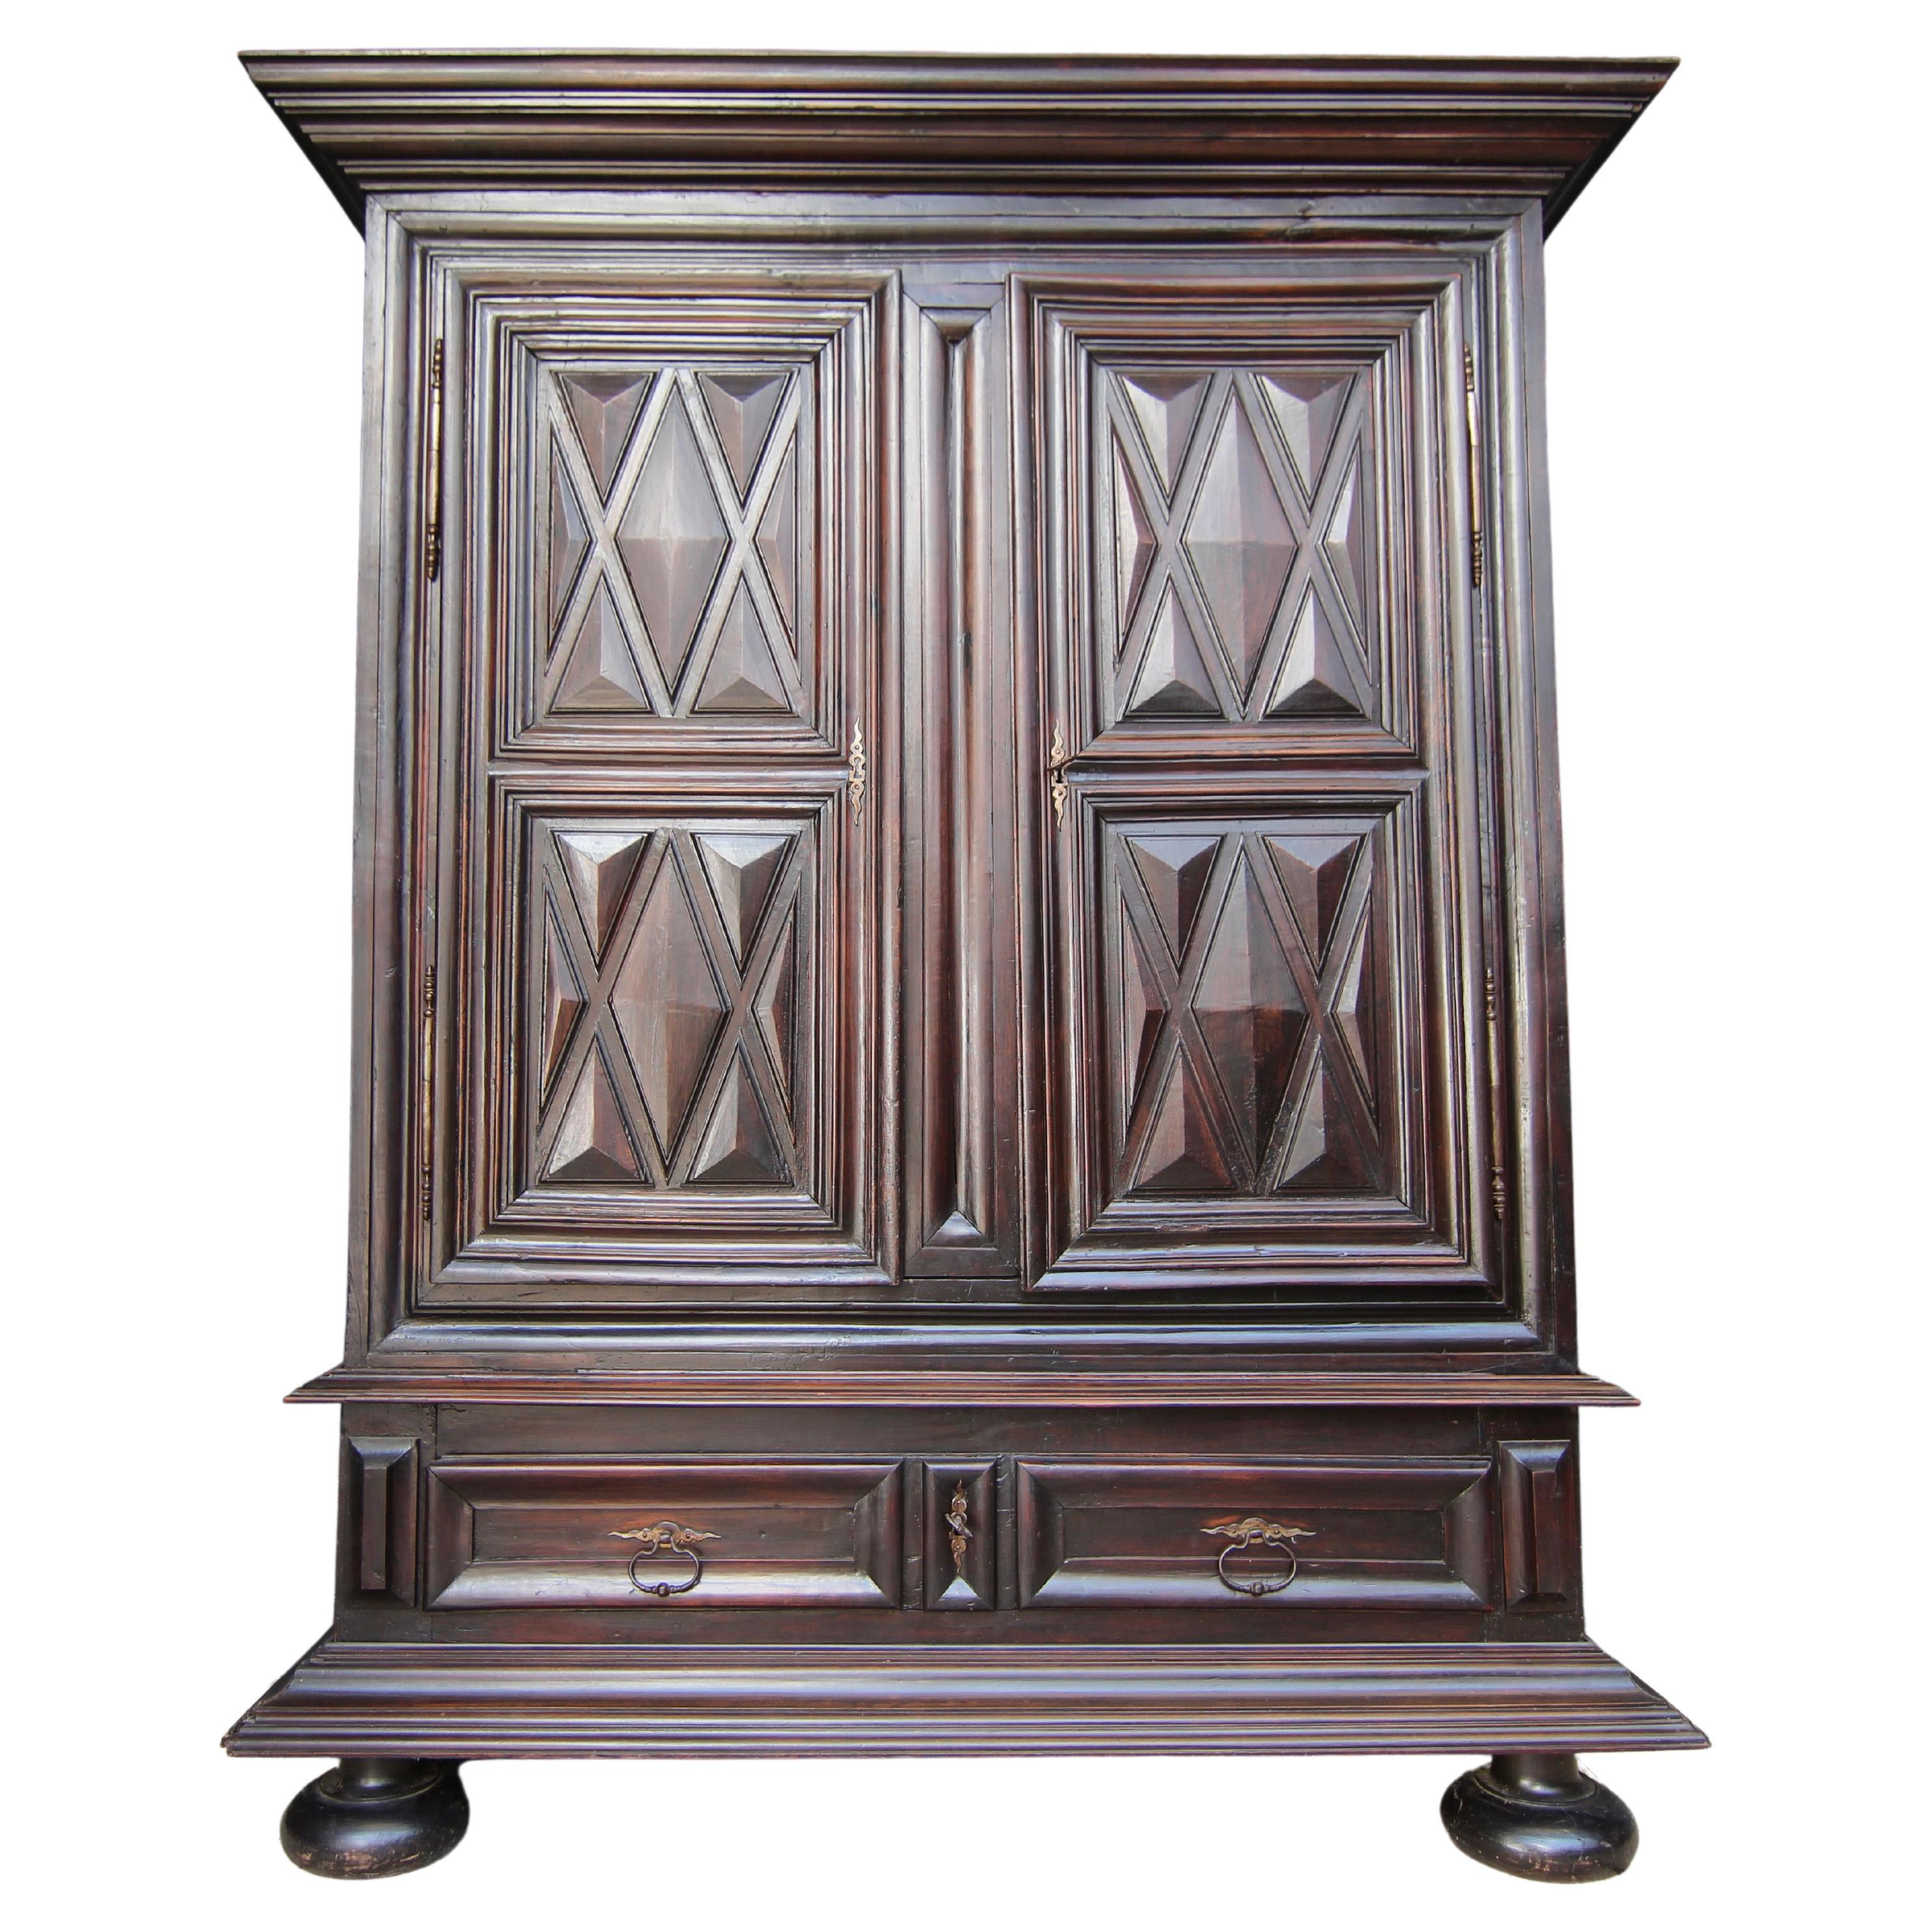 Early 18th Century Walnut Louis XII Armoire with Carved Diamond Point Panels